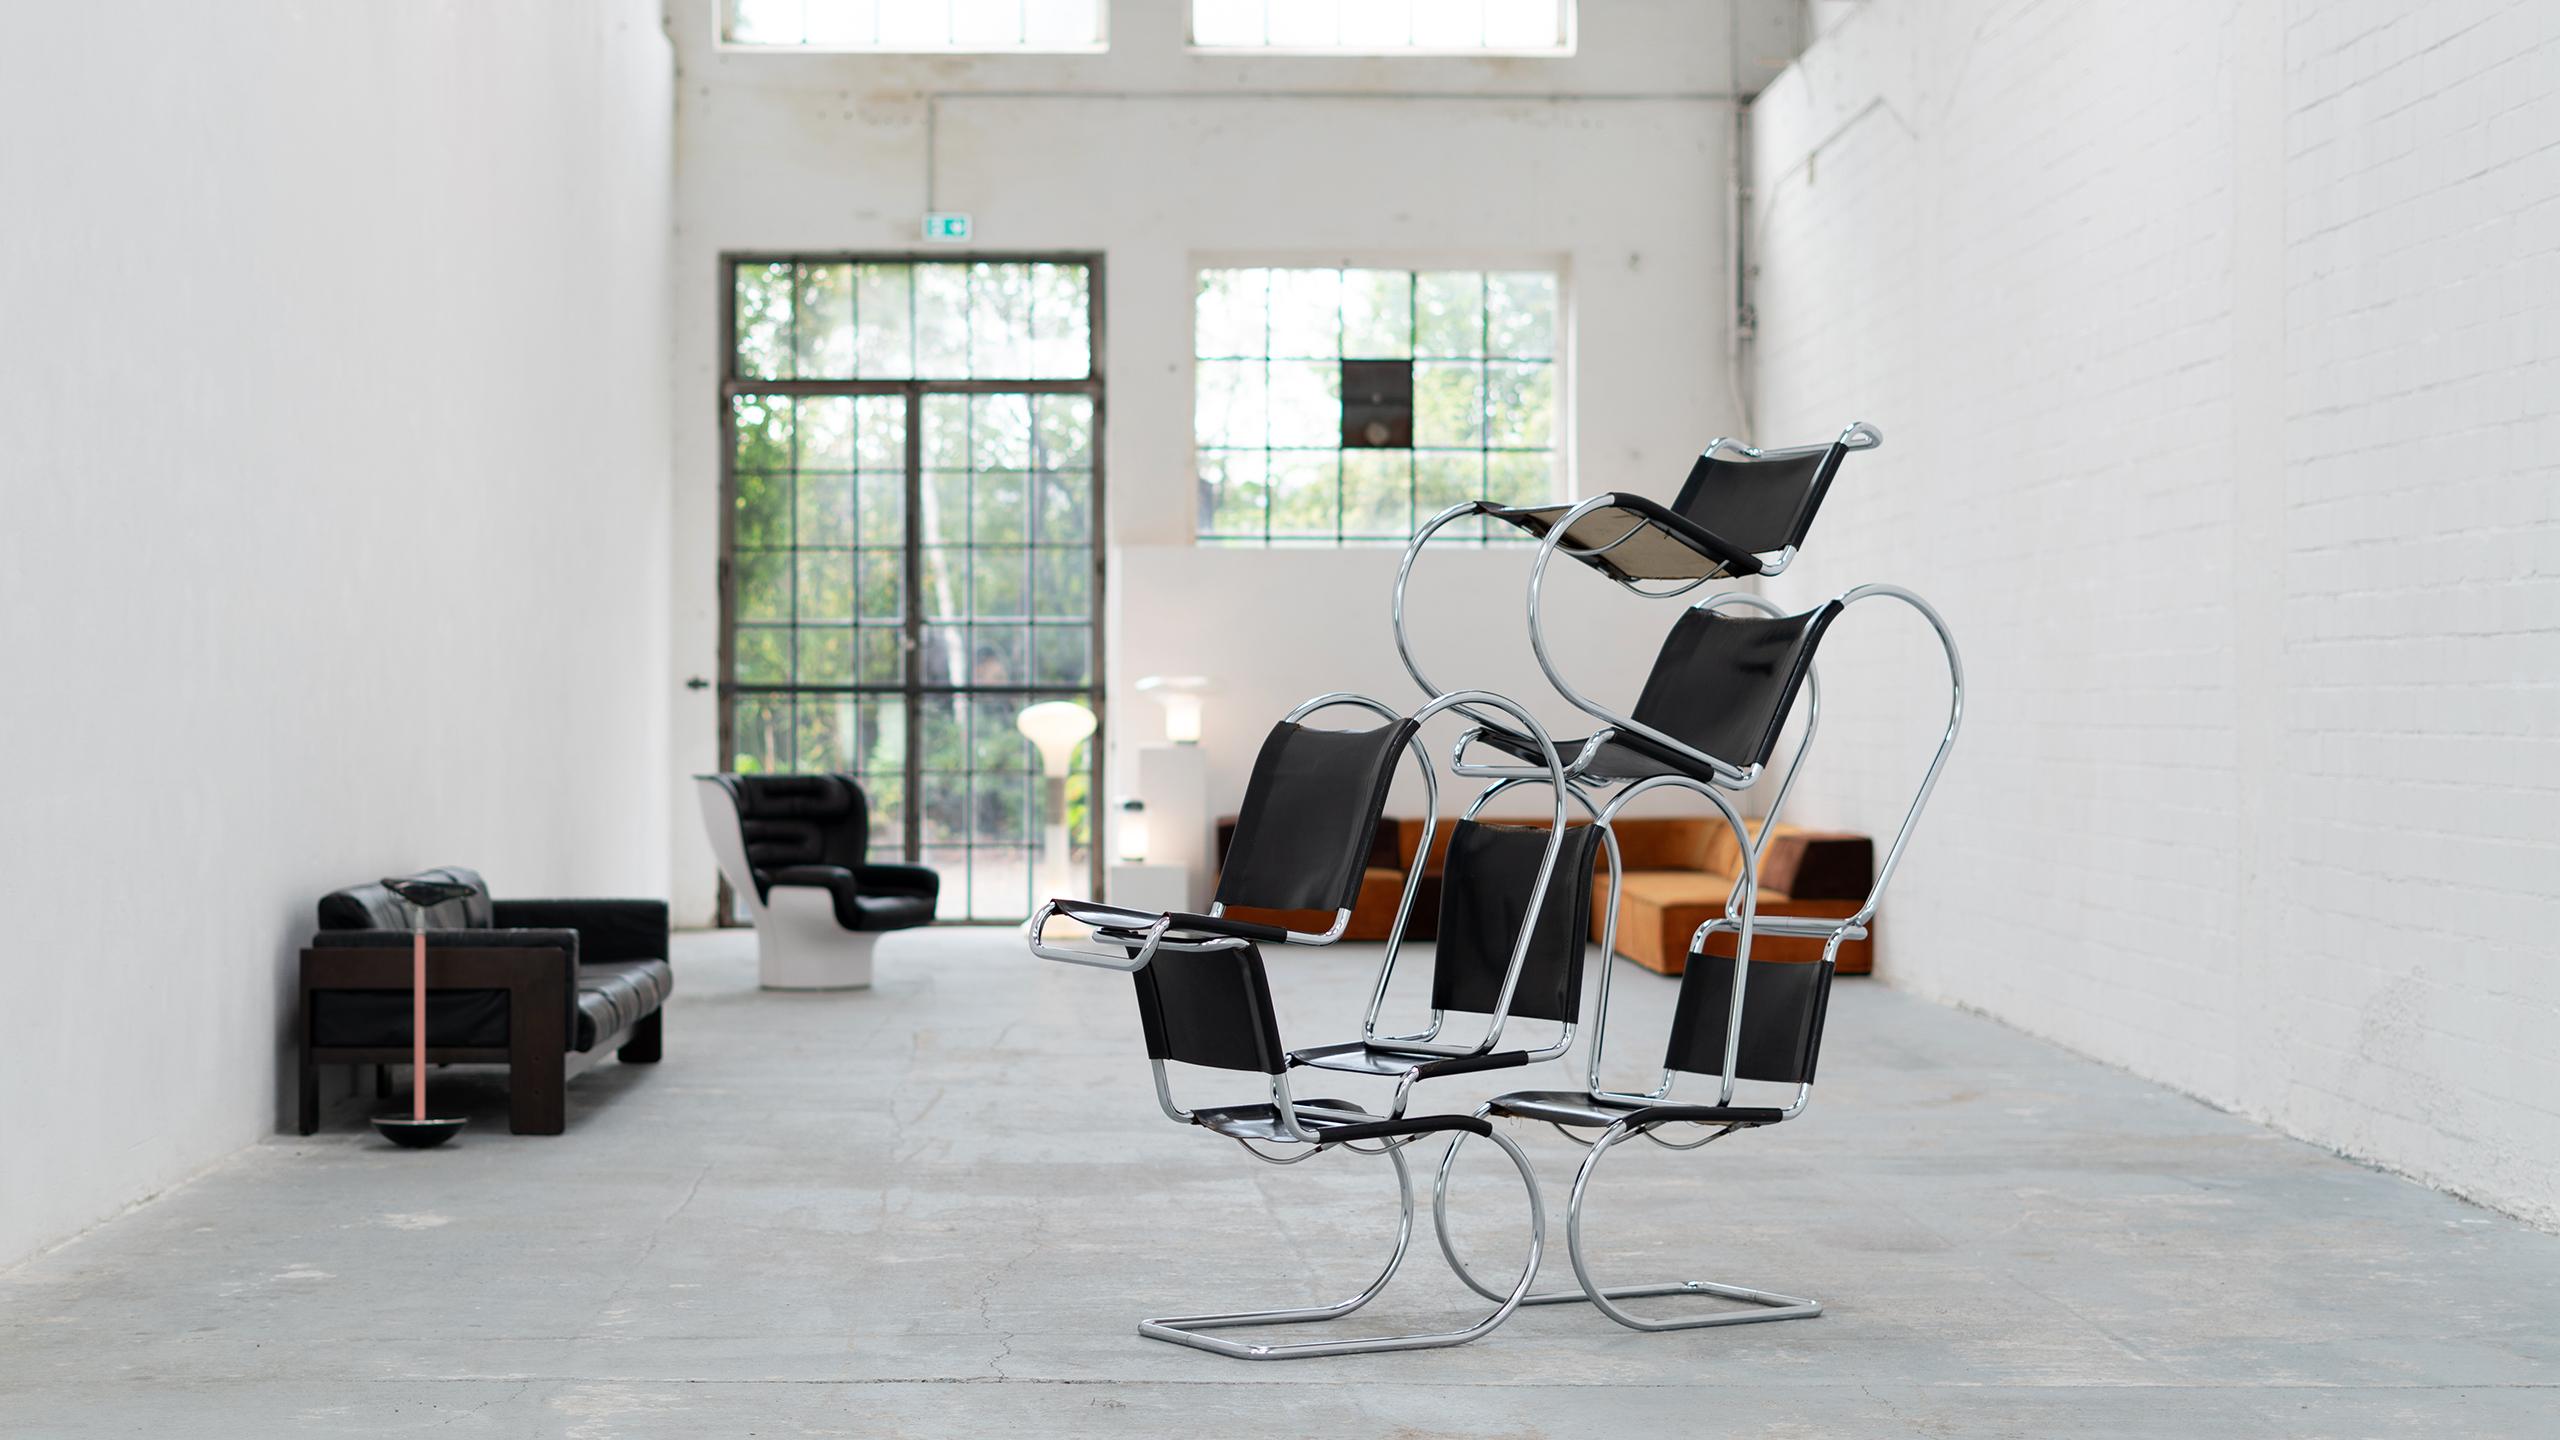 Set of 6 MR10 cantilever chairs by Ludwig Mies Van der Rohe for Thonet.

Mies Van der Rohe first showed his cantilever chair in 1927 at the Weißenhofsiedlung, Germany.

Inspired by the cantilever chairs of Mart Stam and Marcel Breuer, Ludwig Mies